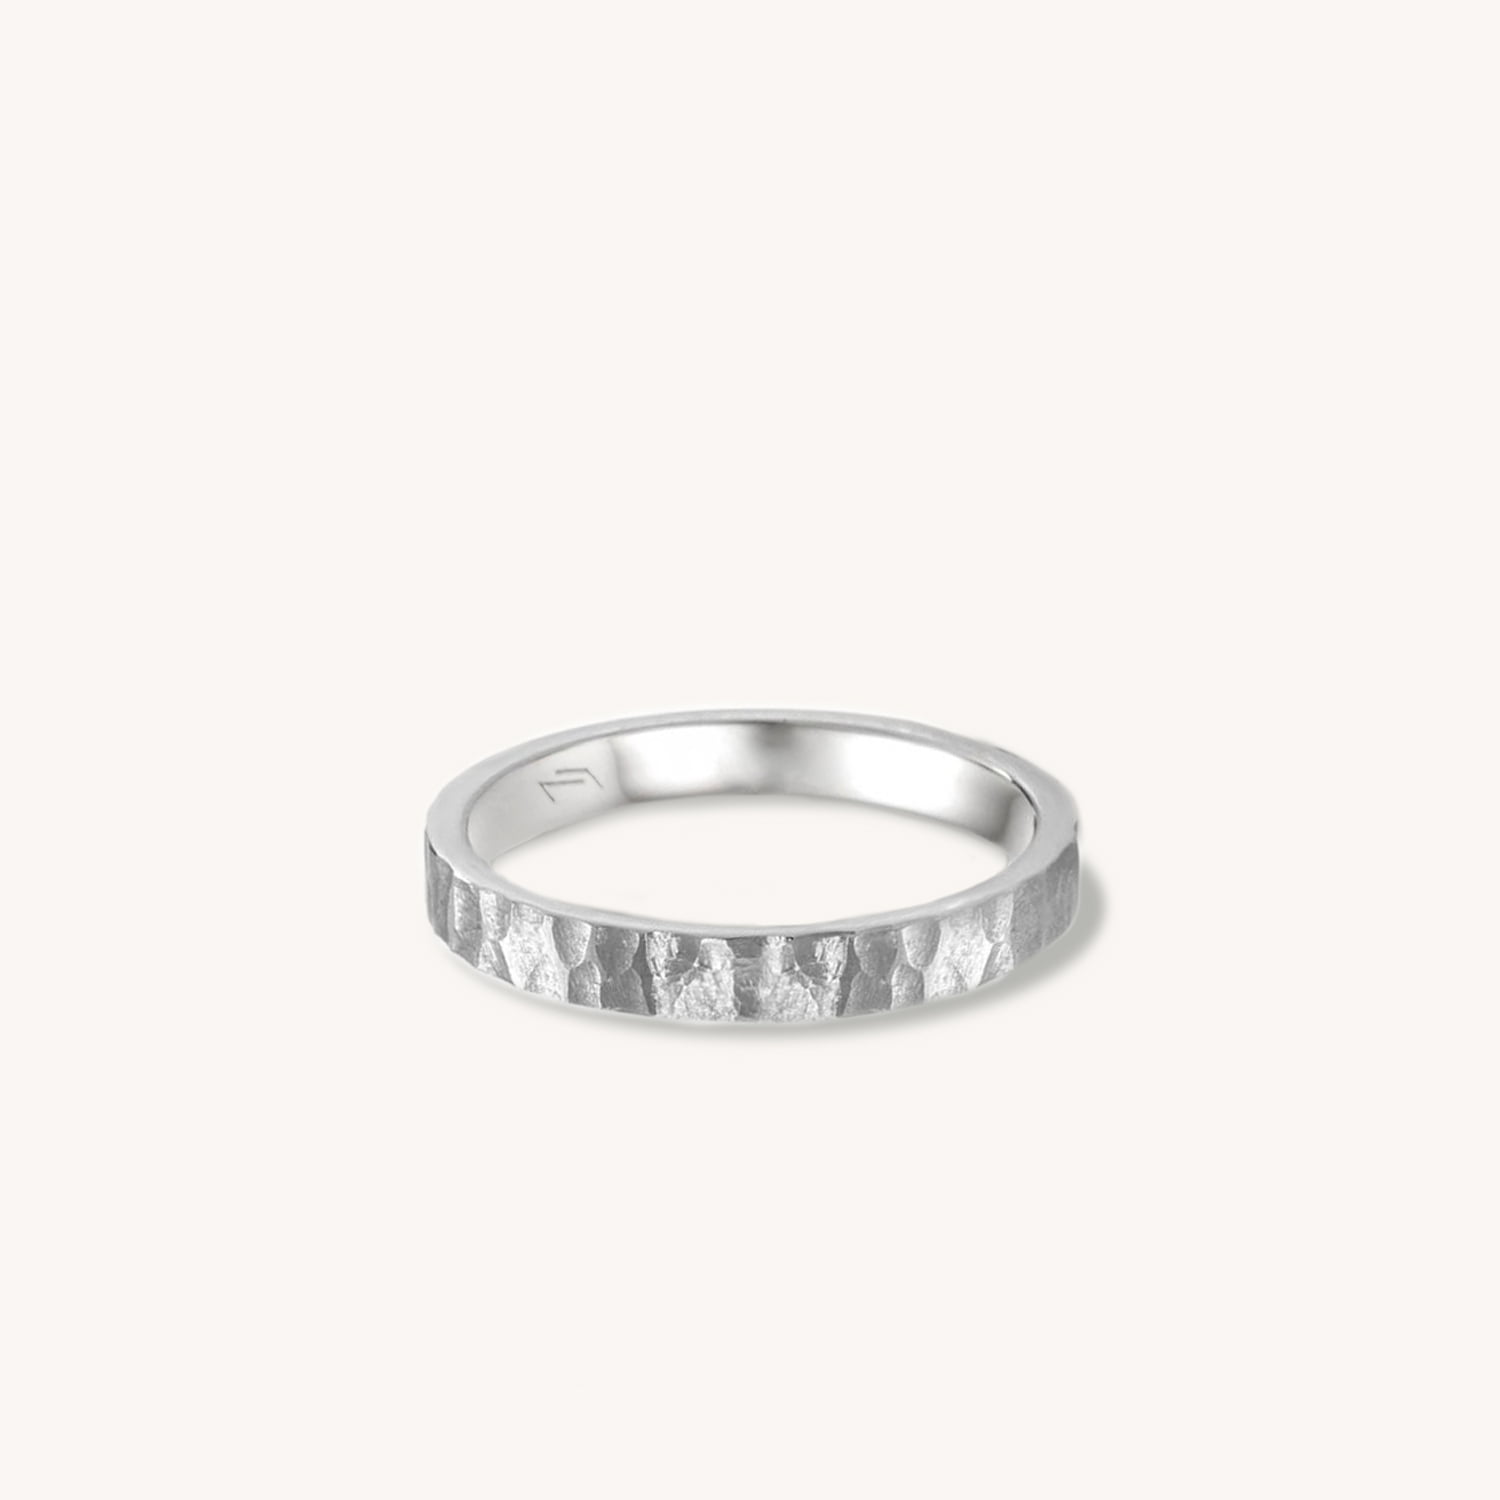 Rippled Finish Textured Stainless Steel Ring - Tailored Jewel